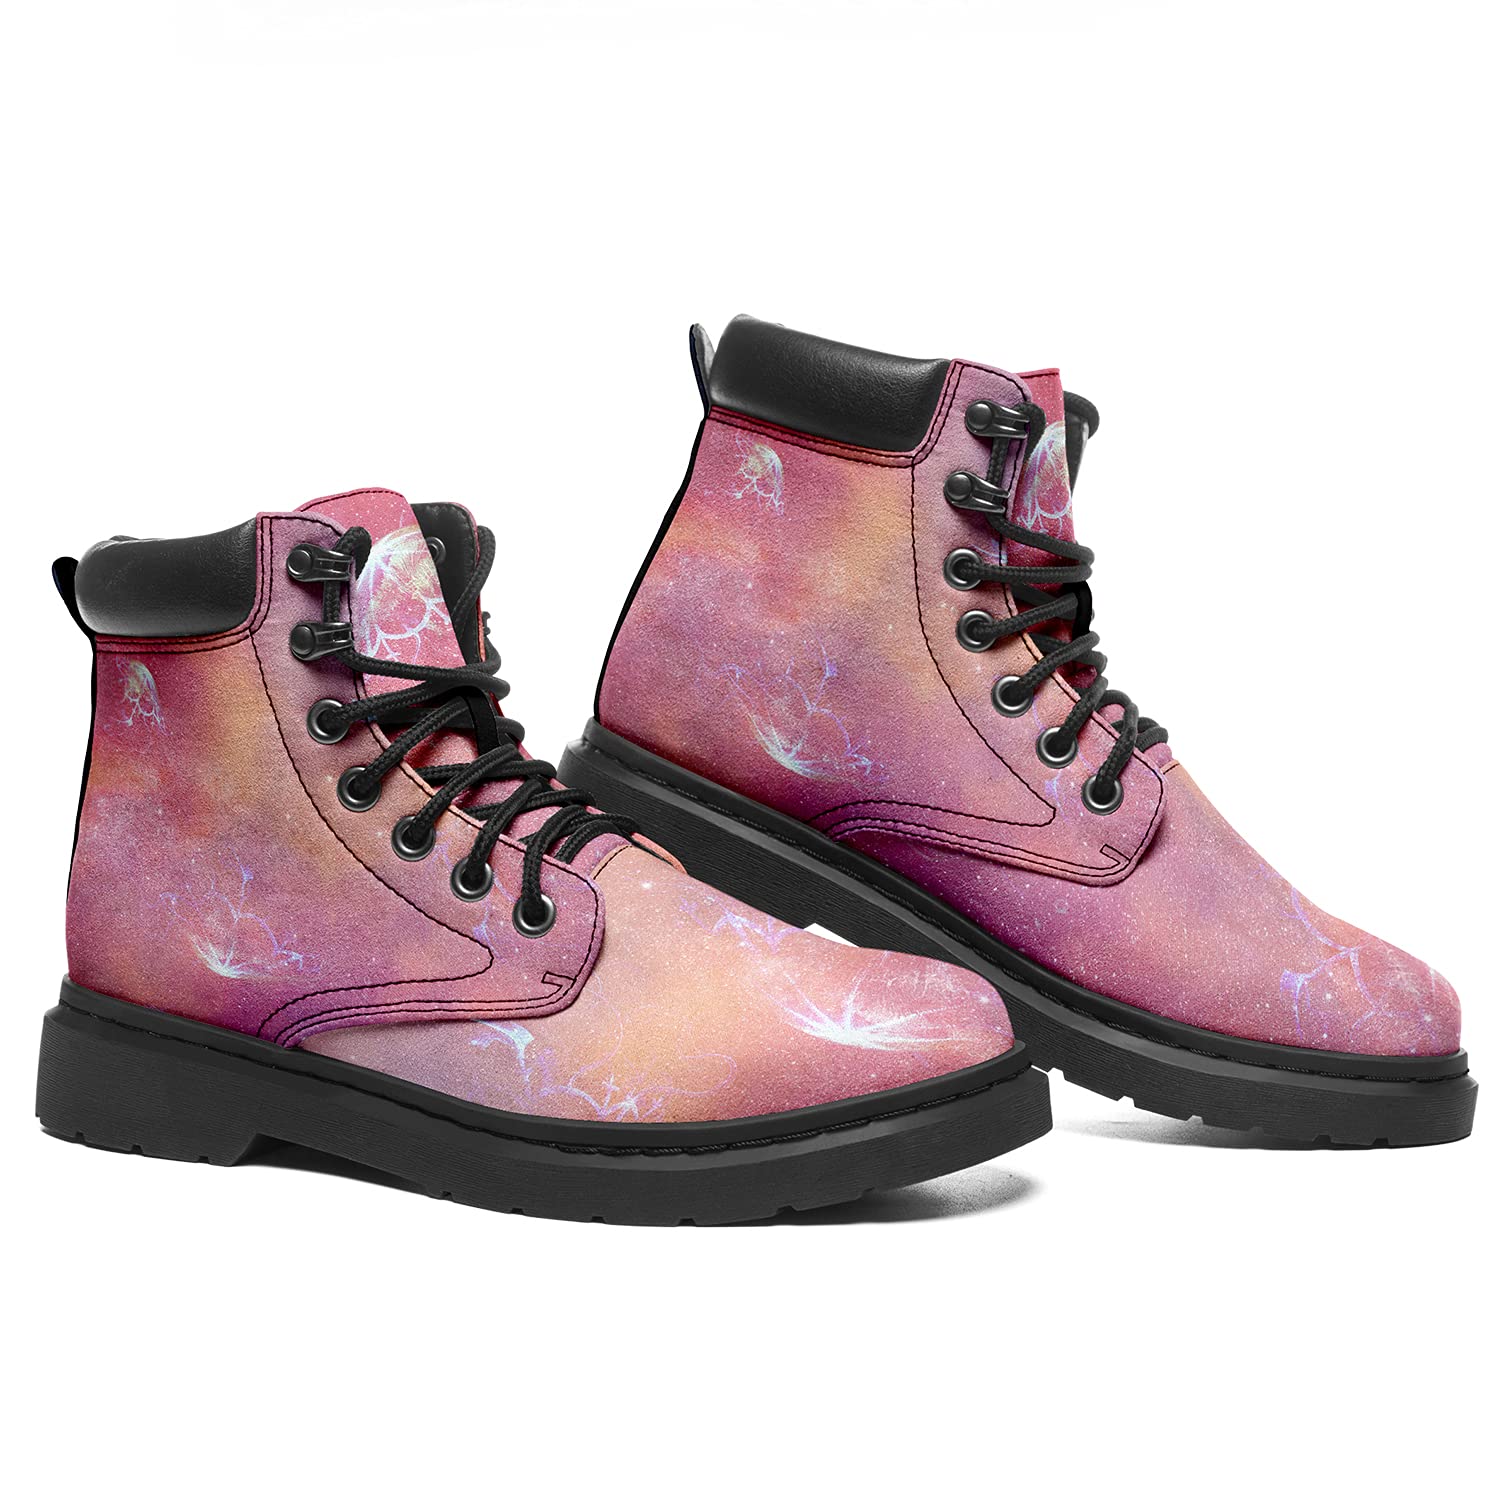 Jellyfish Print Classic Boots Ankle Boots for Women Lace-Up Leather Ladies Fashionable Combat Boots 